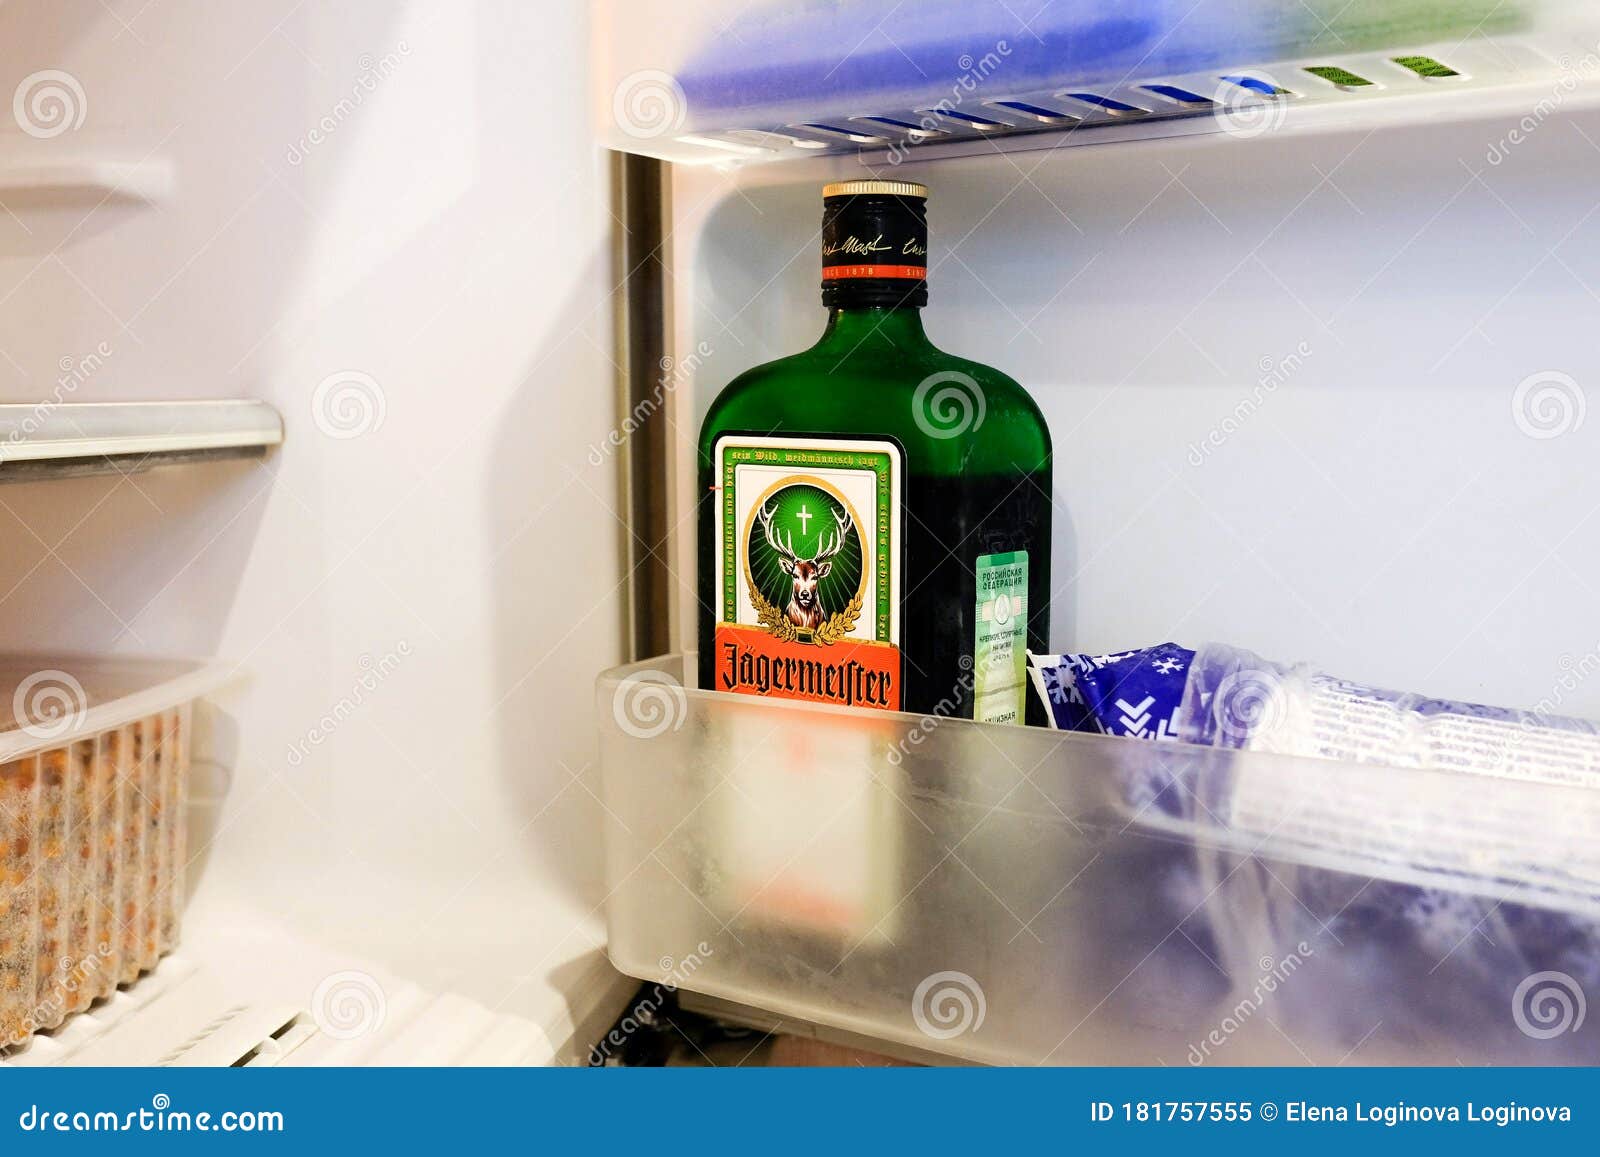 Jagermeister Liquor in the Freezer. Storage of a German Alcoholic Drink in  the Refrigerator at Home Editorial Image - Image of green, jaegermeister:  181757555